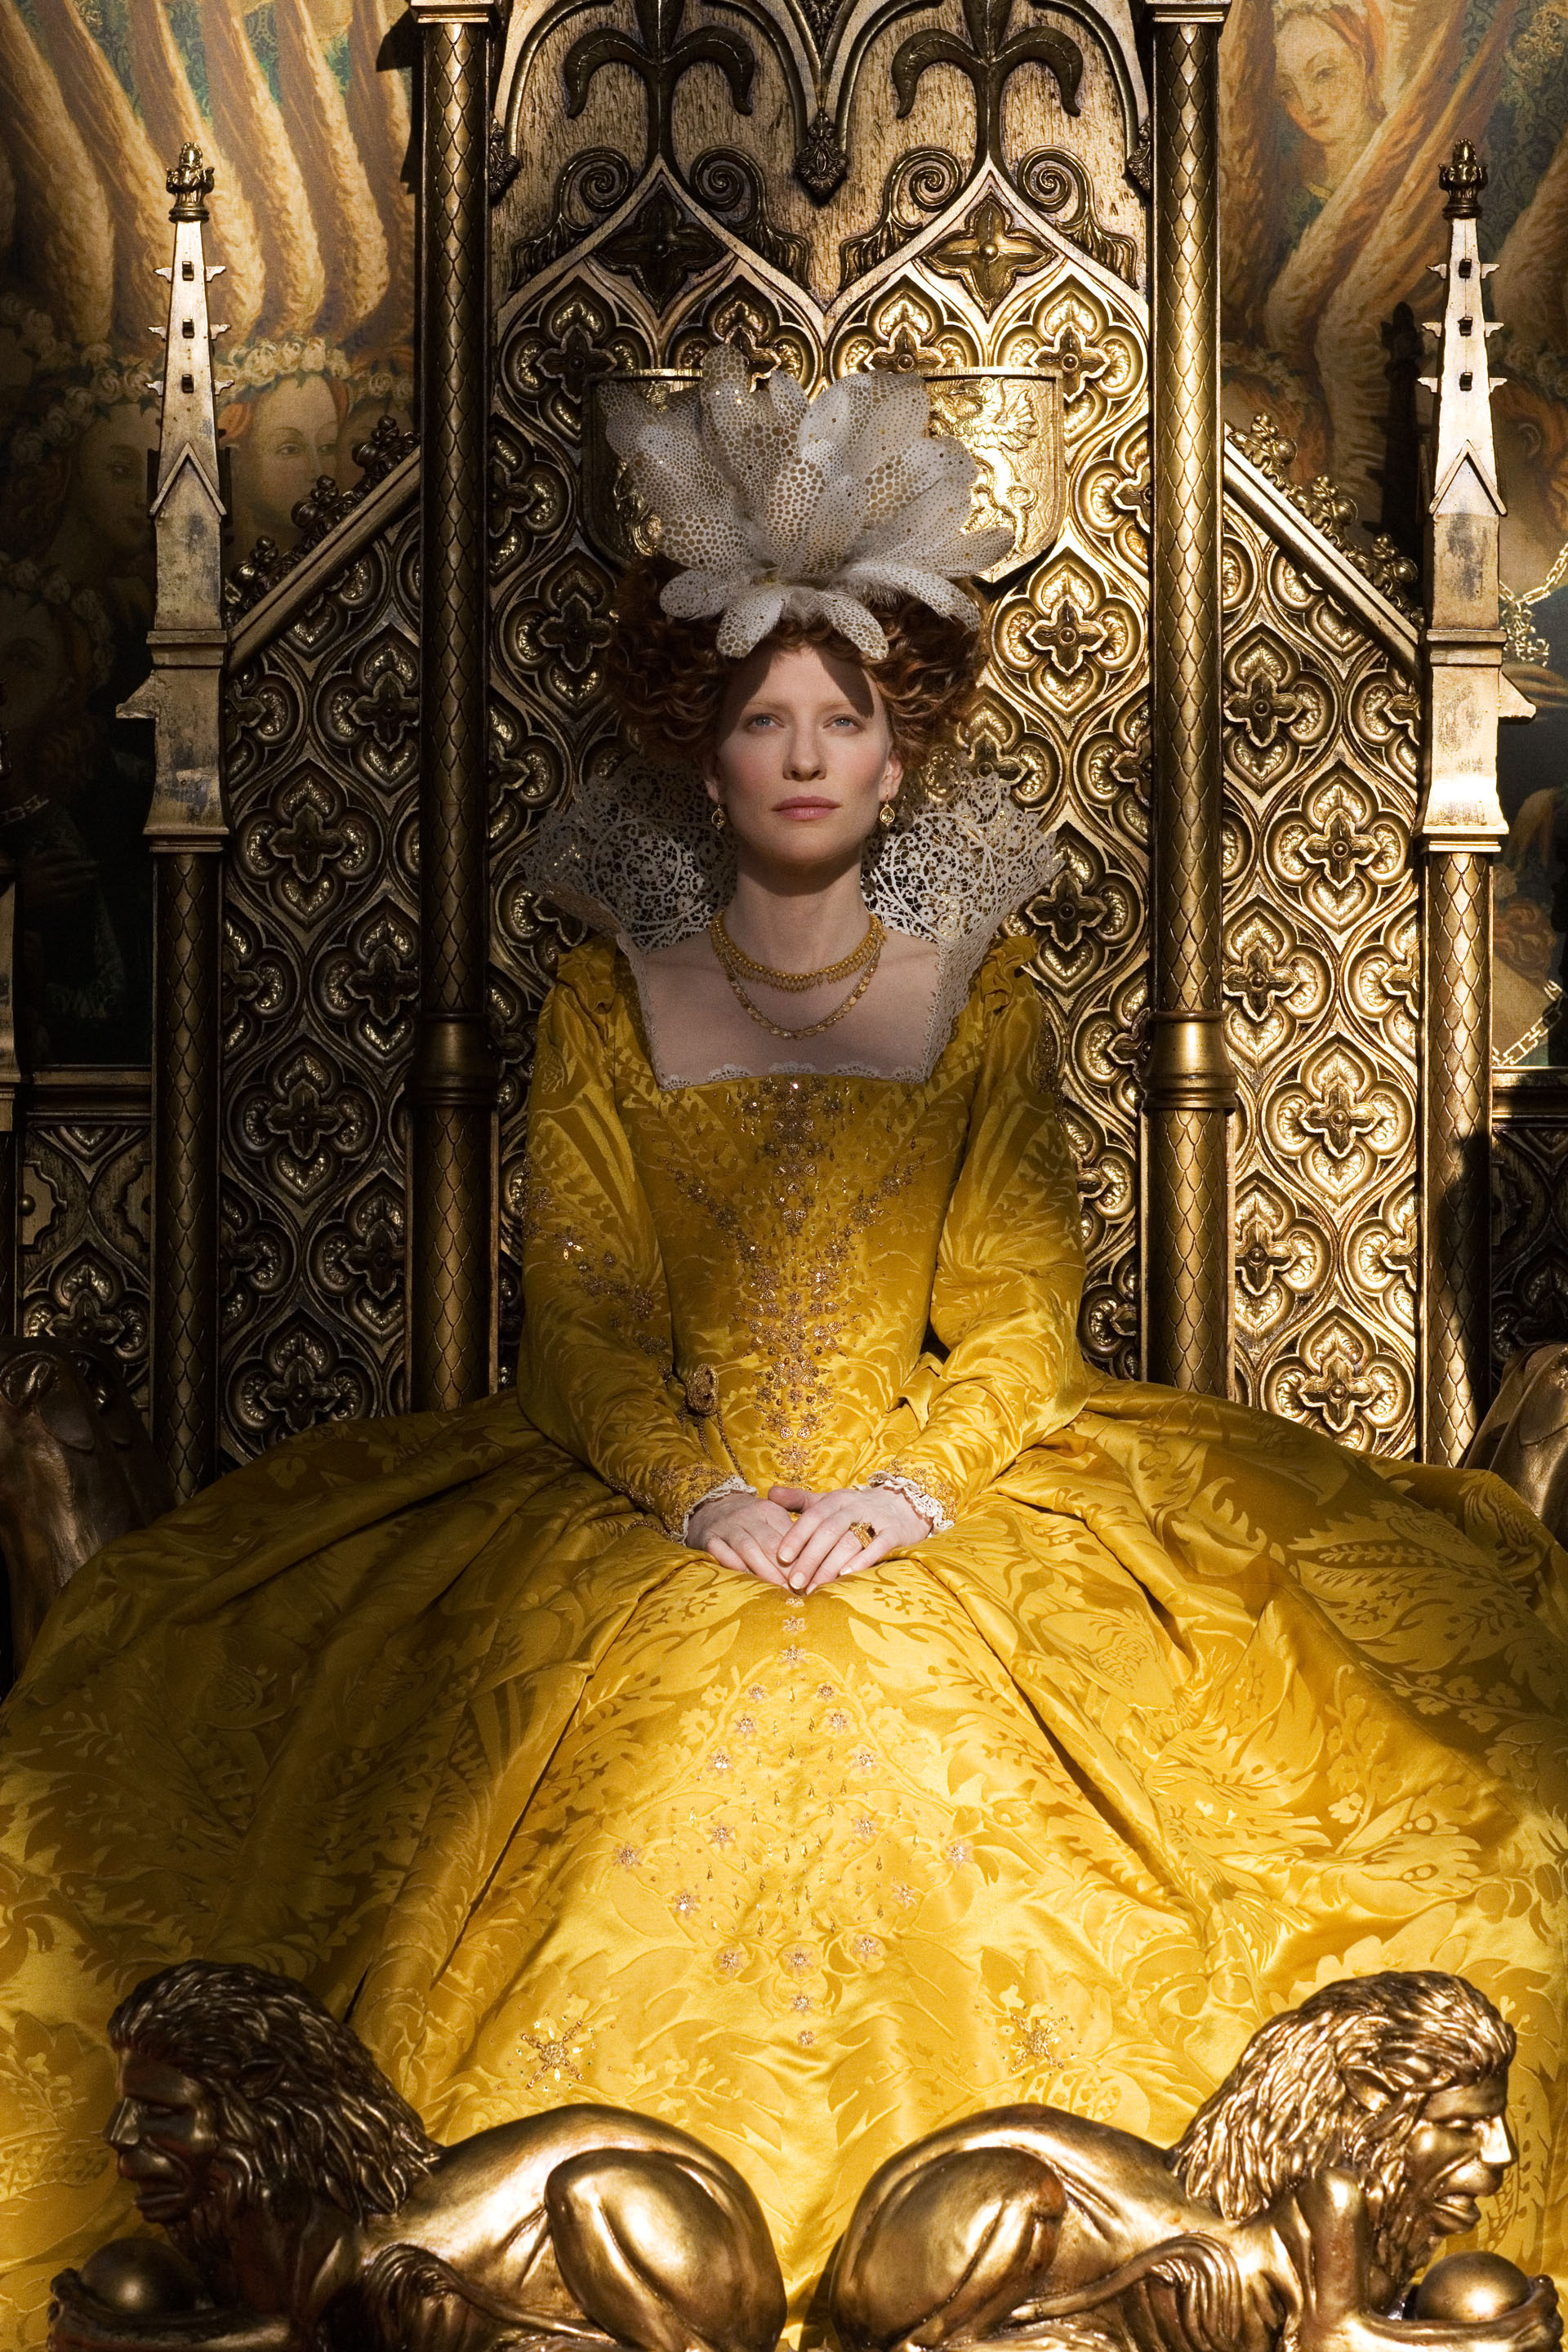 Elizabeth the Golden Age wallpapers, movie HQ, pictures 4k, 2019, 1920x2880 HD Handy